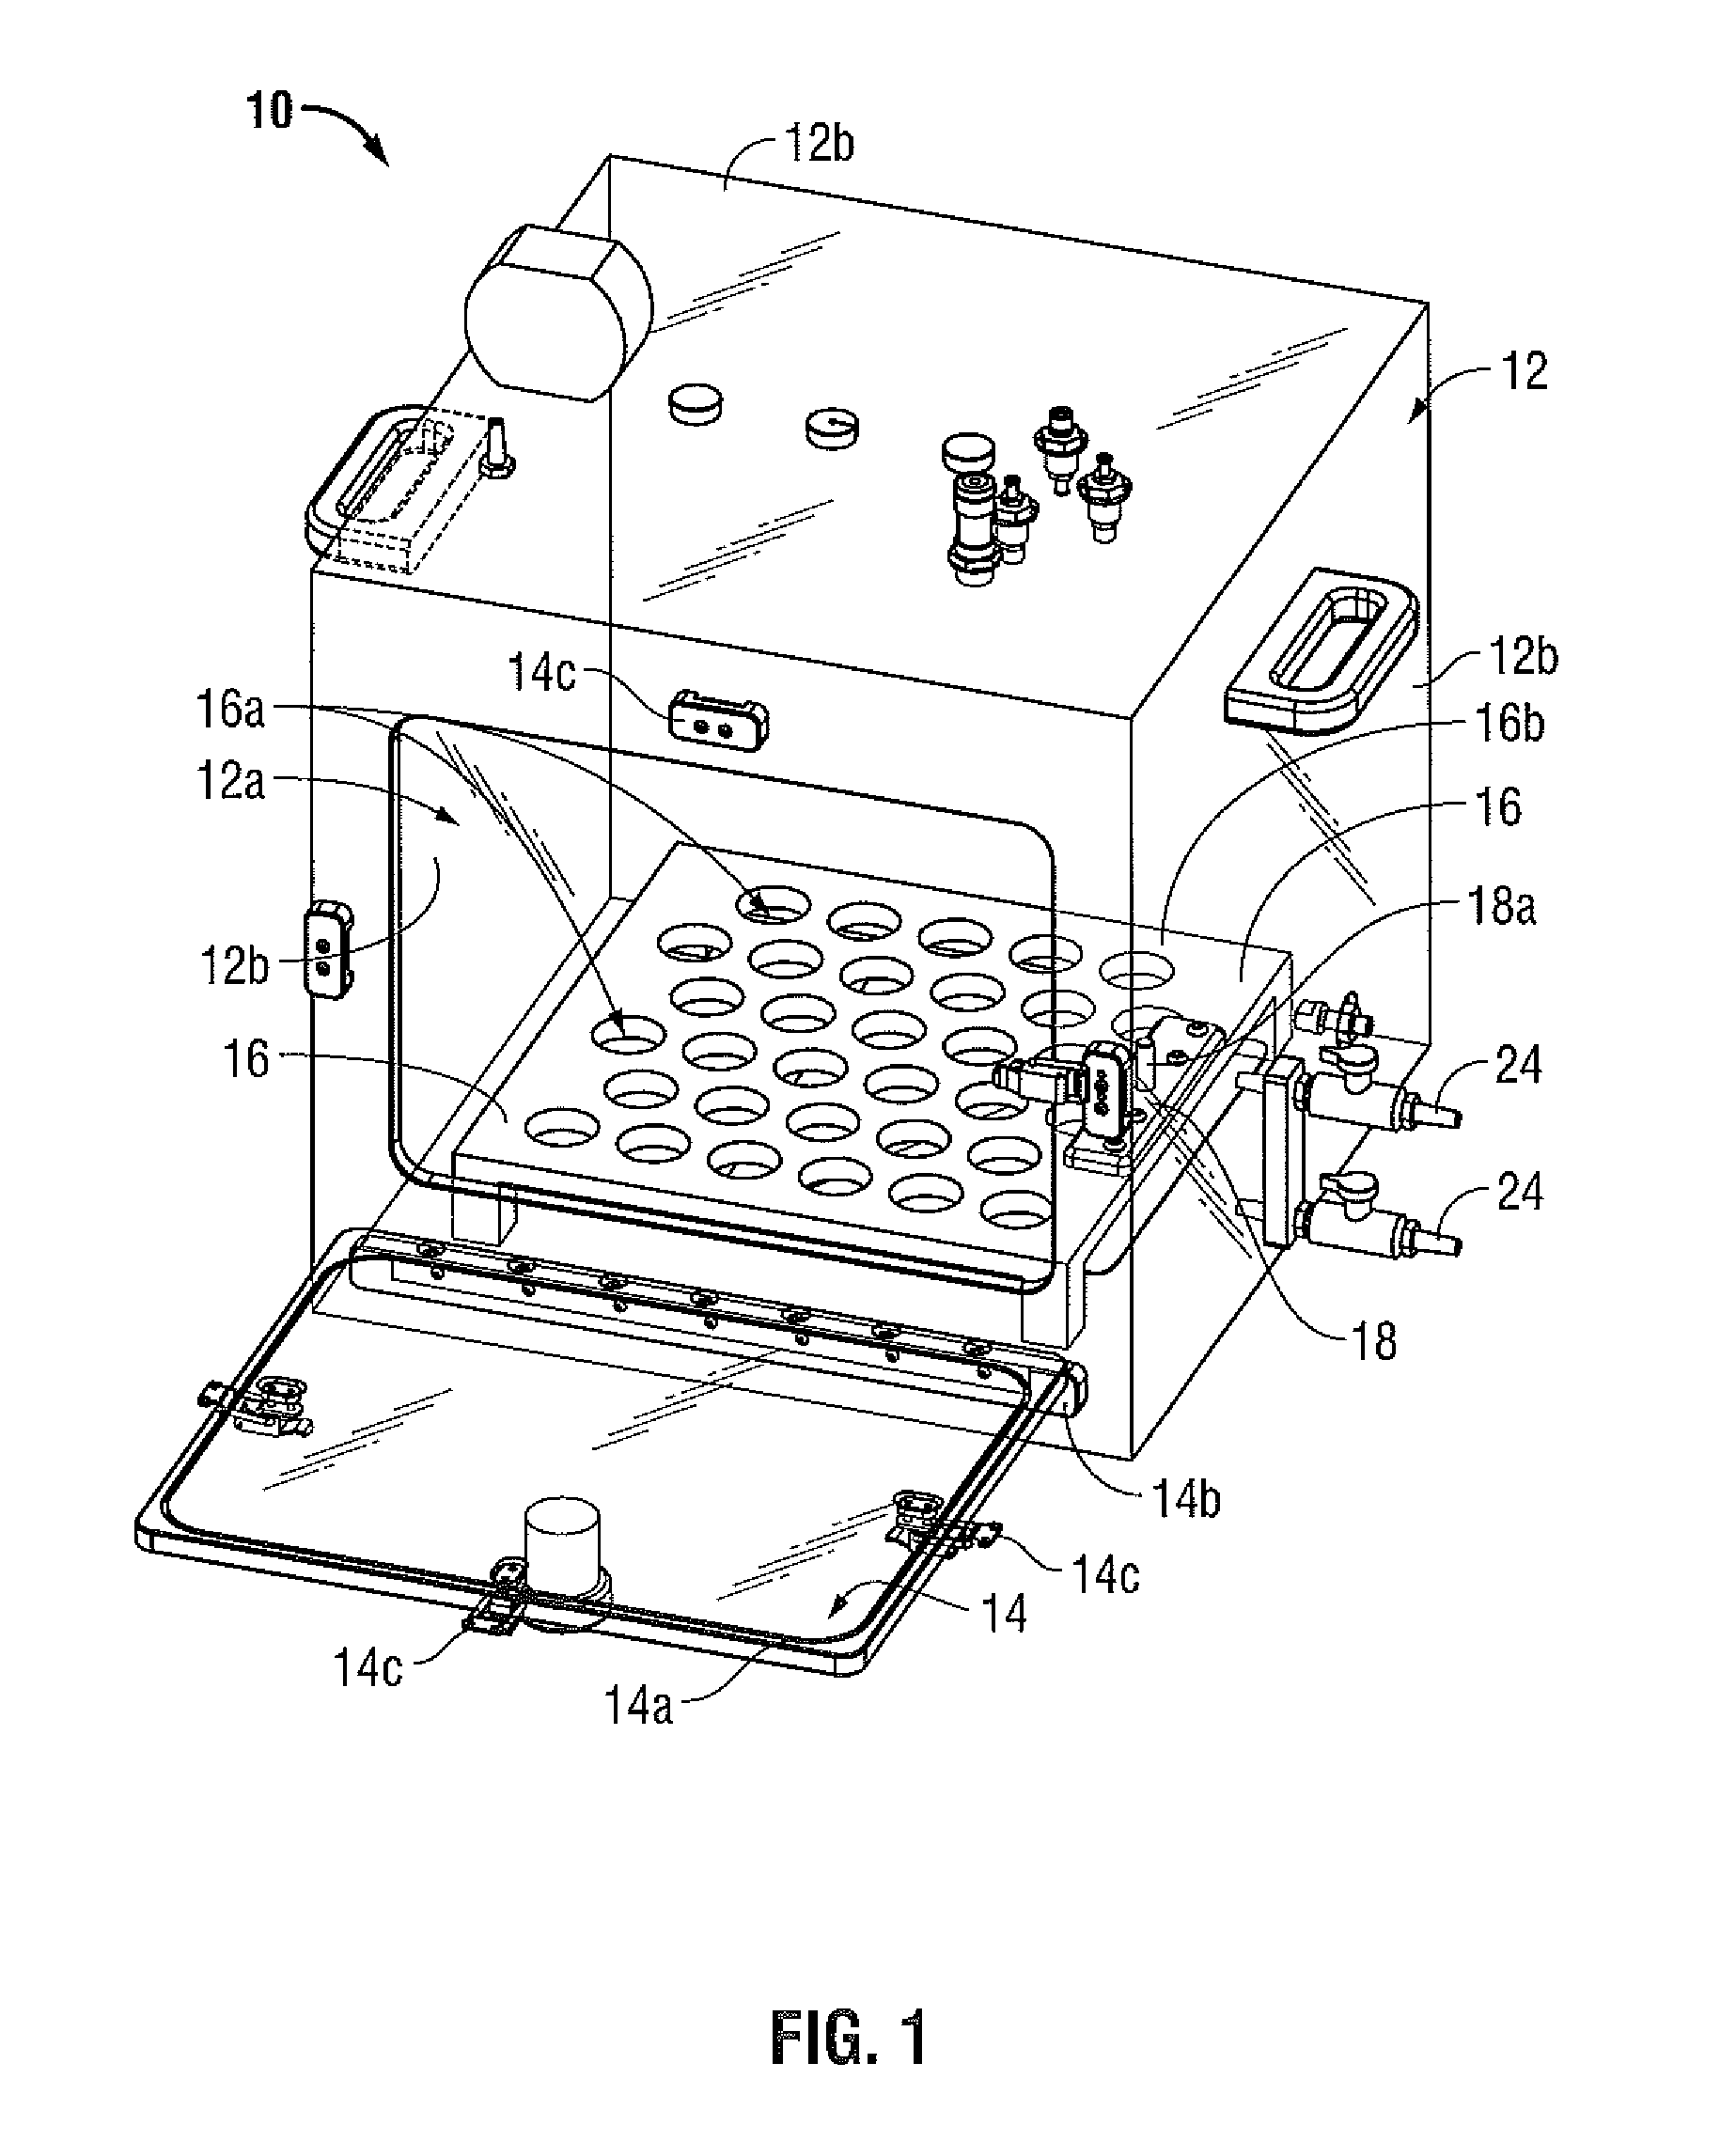 System and Method for an Ex Vivo Body Organ Electrosurgical Research Device